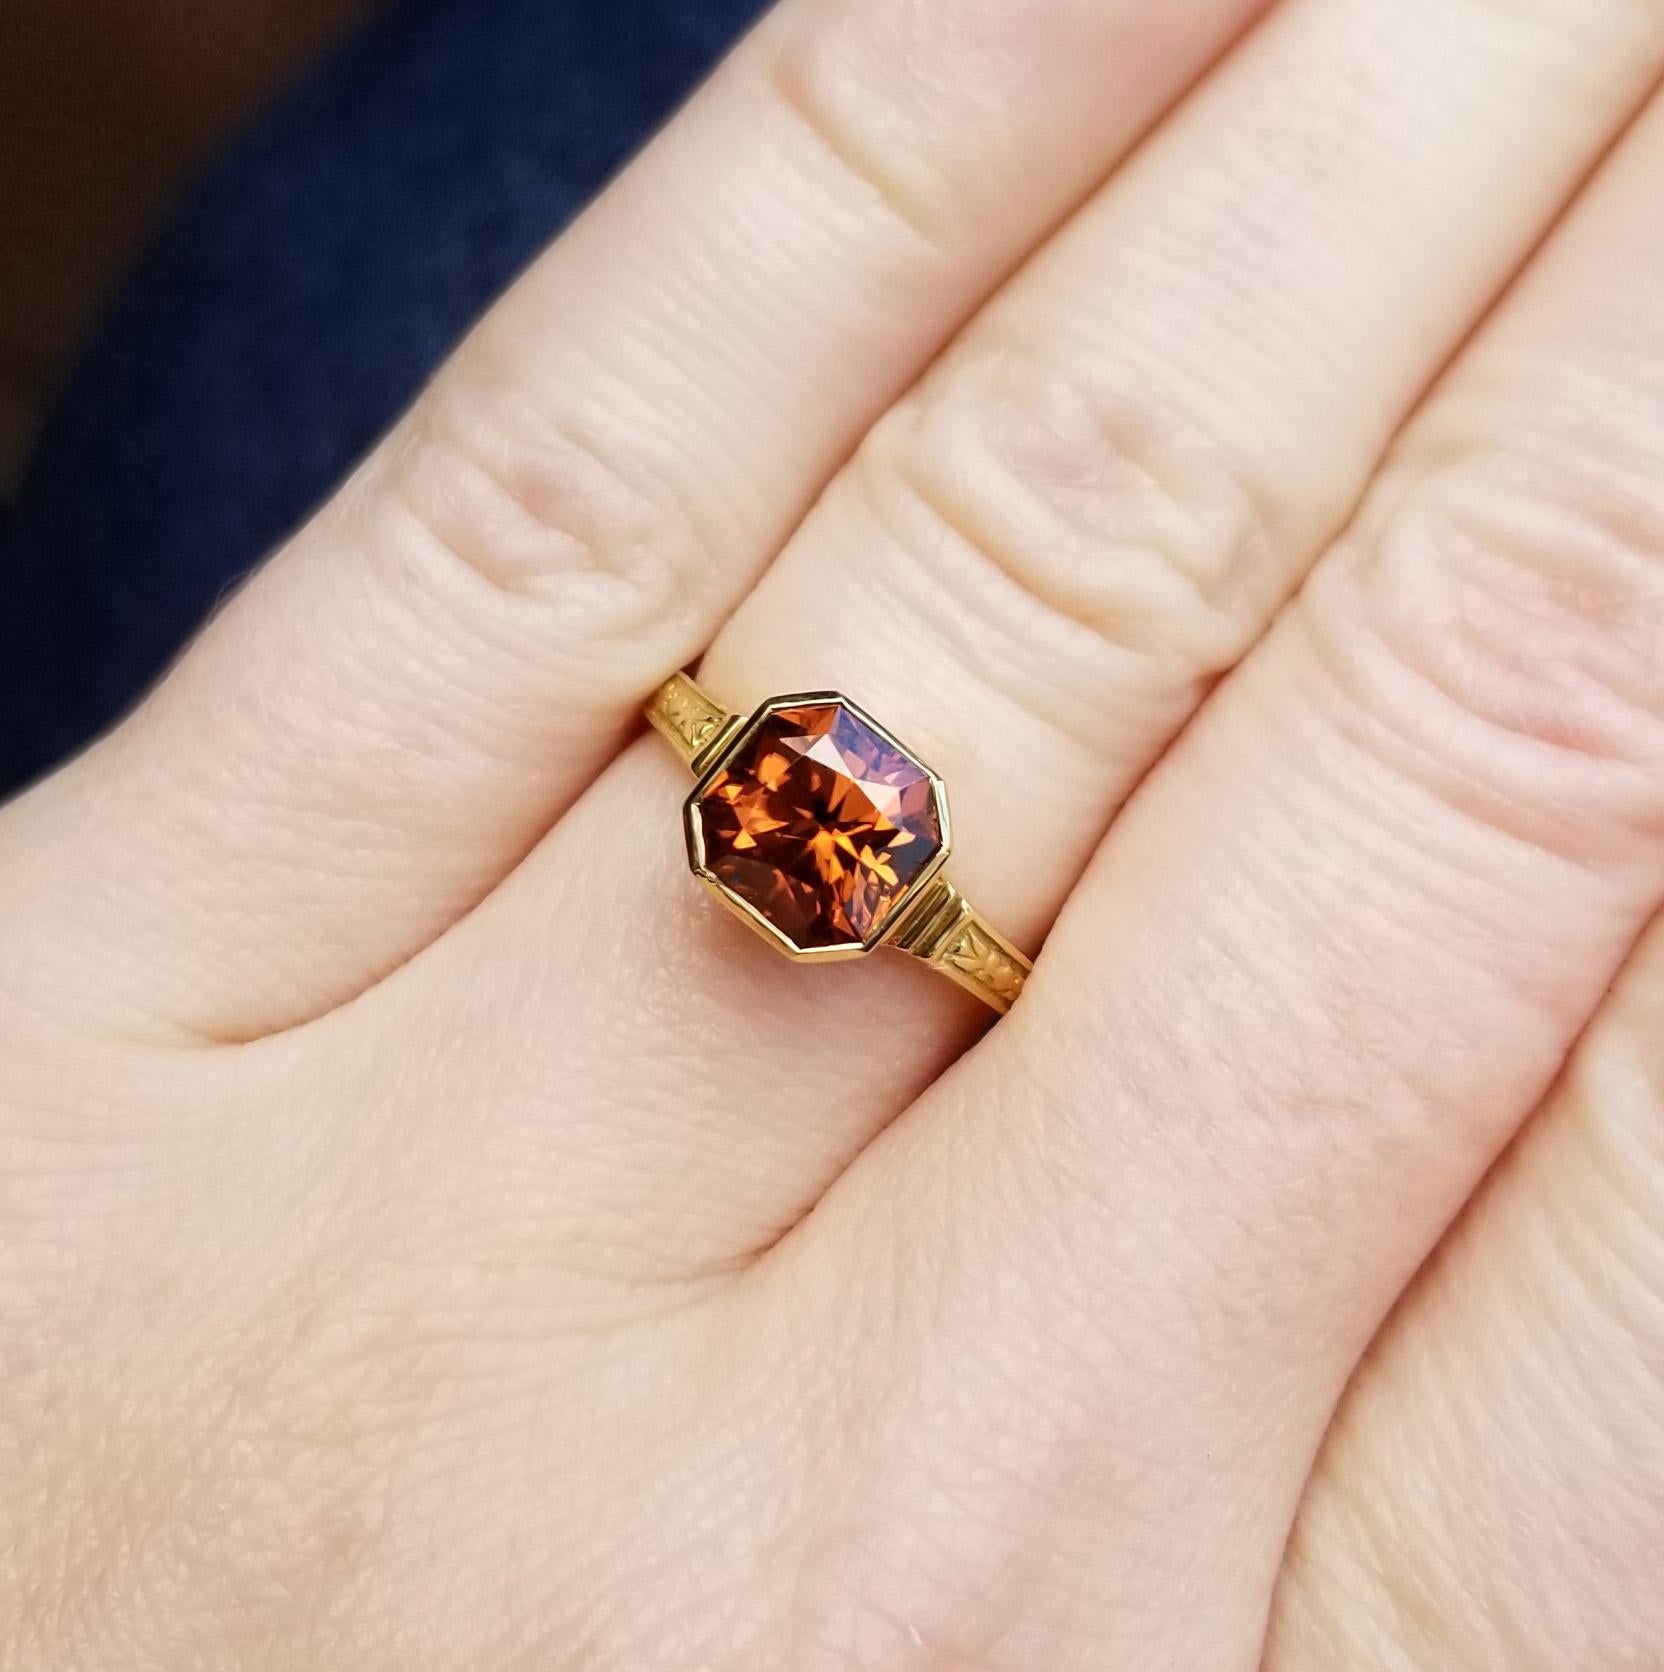 The intensity one expects from a well cut zircon is amplified by the rich, flaming orange-red color of this gorgeous gem from Tanzania. The classic octagon shape is clean and unexpected for the fireball of brilliance that is a good zircon.

This